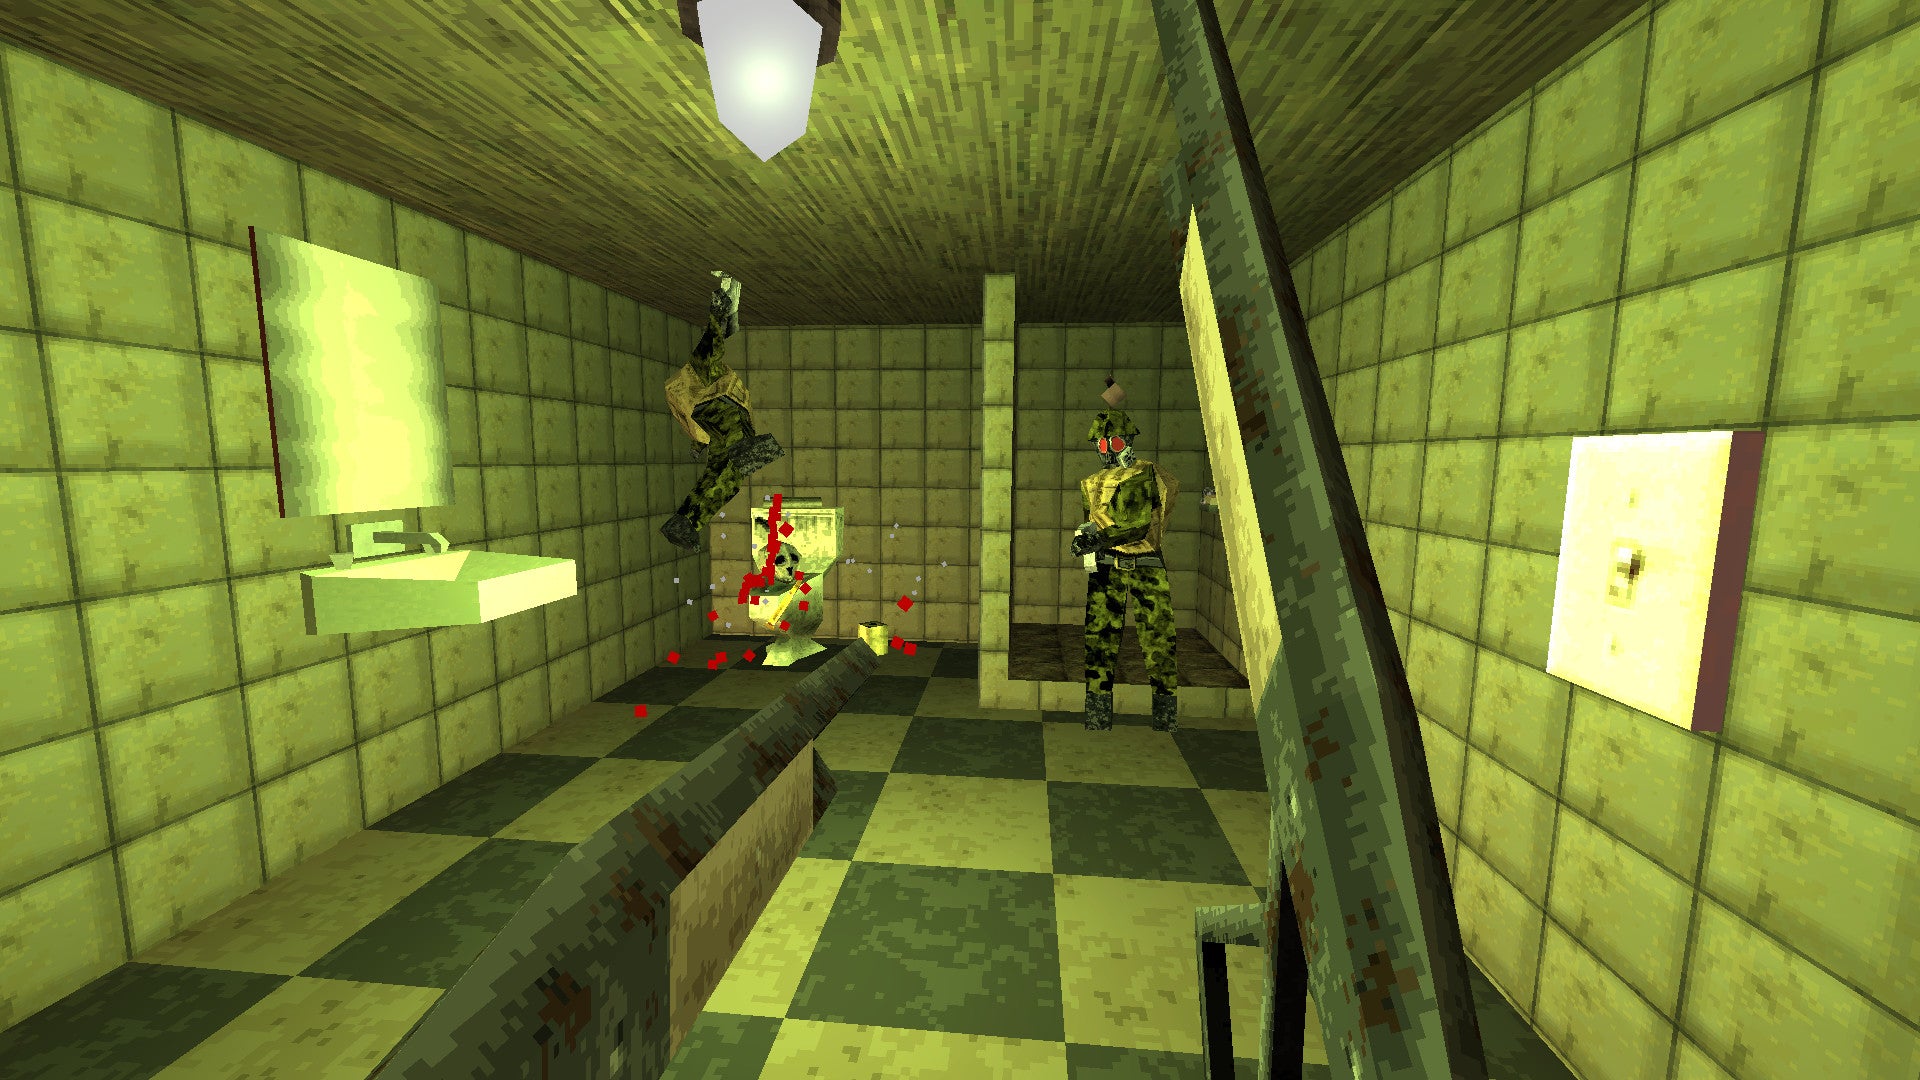 The player faces enemies in a bathroom in Dusk